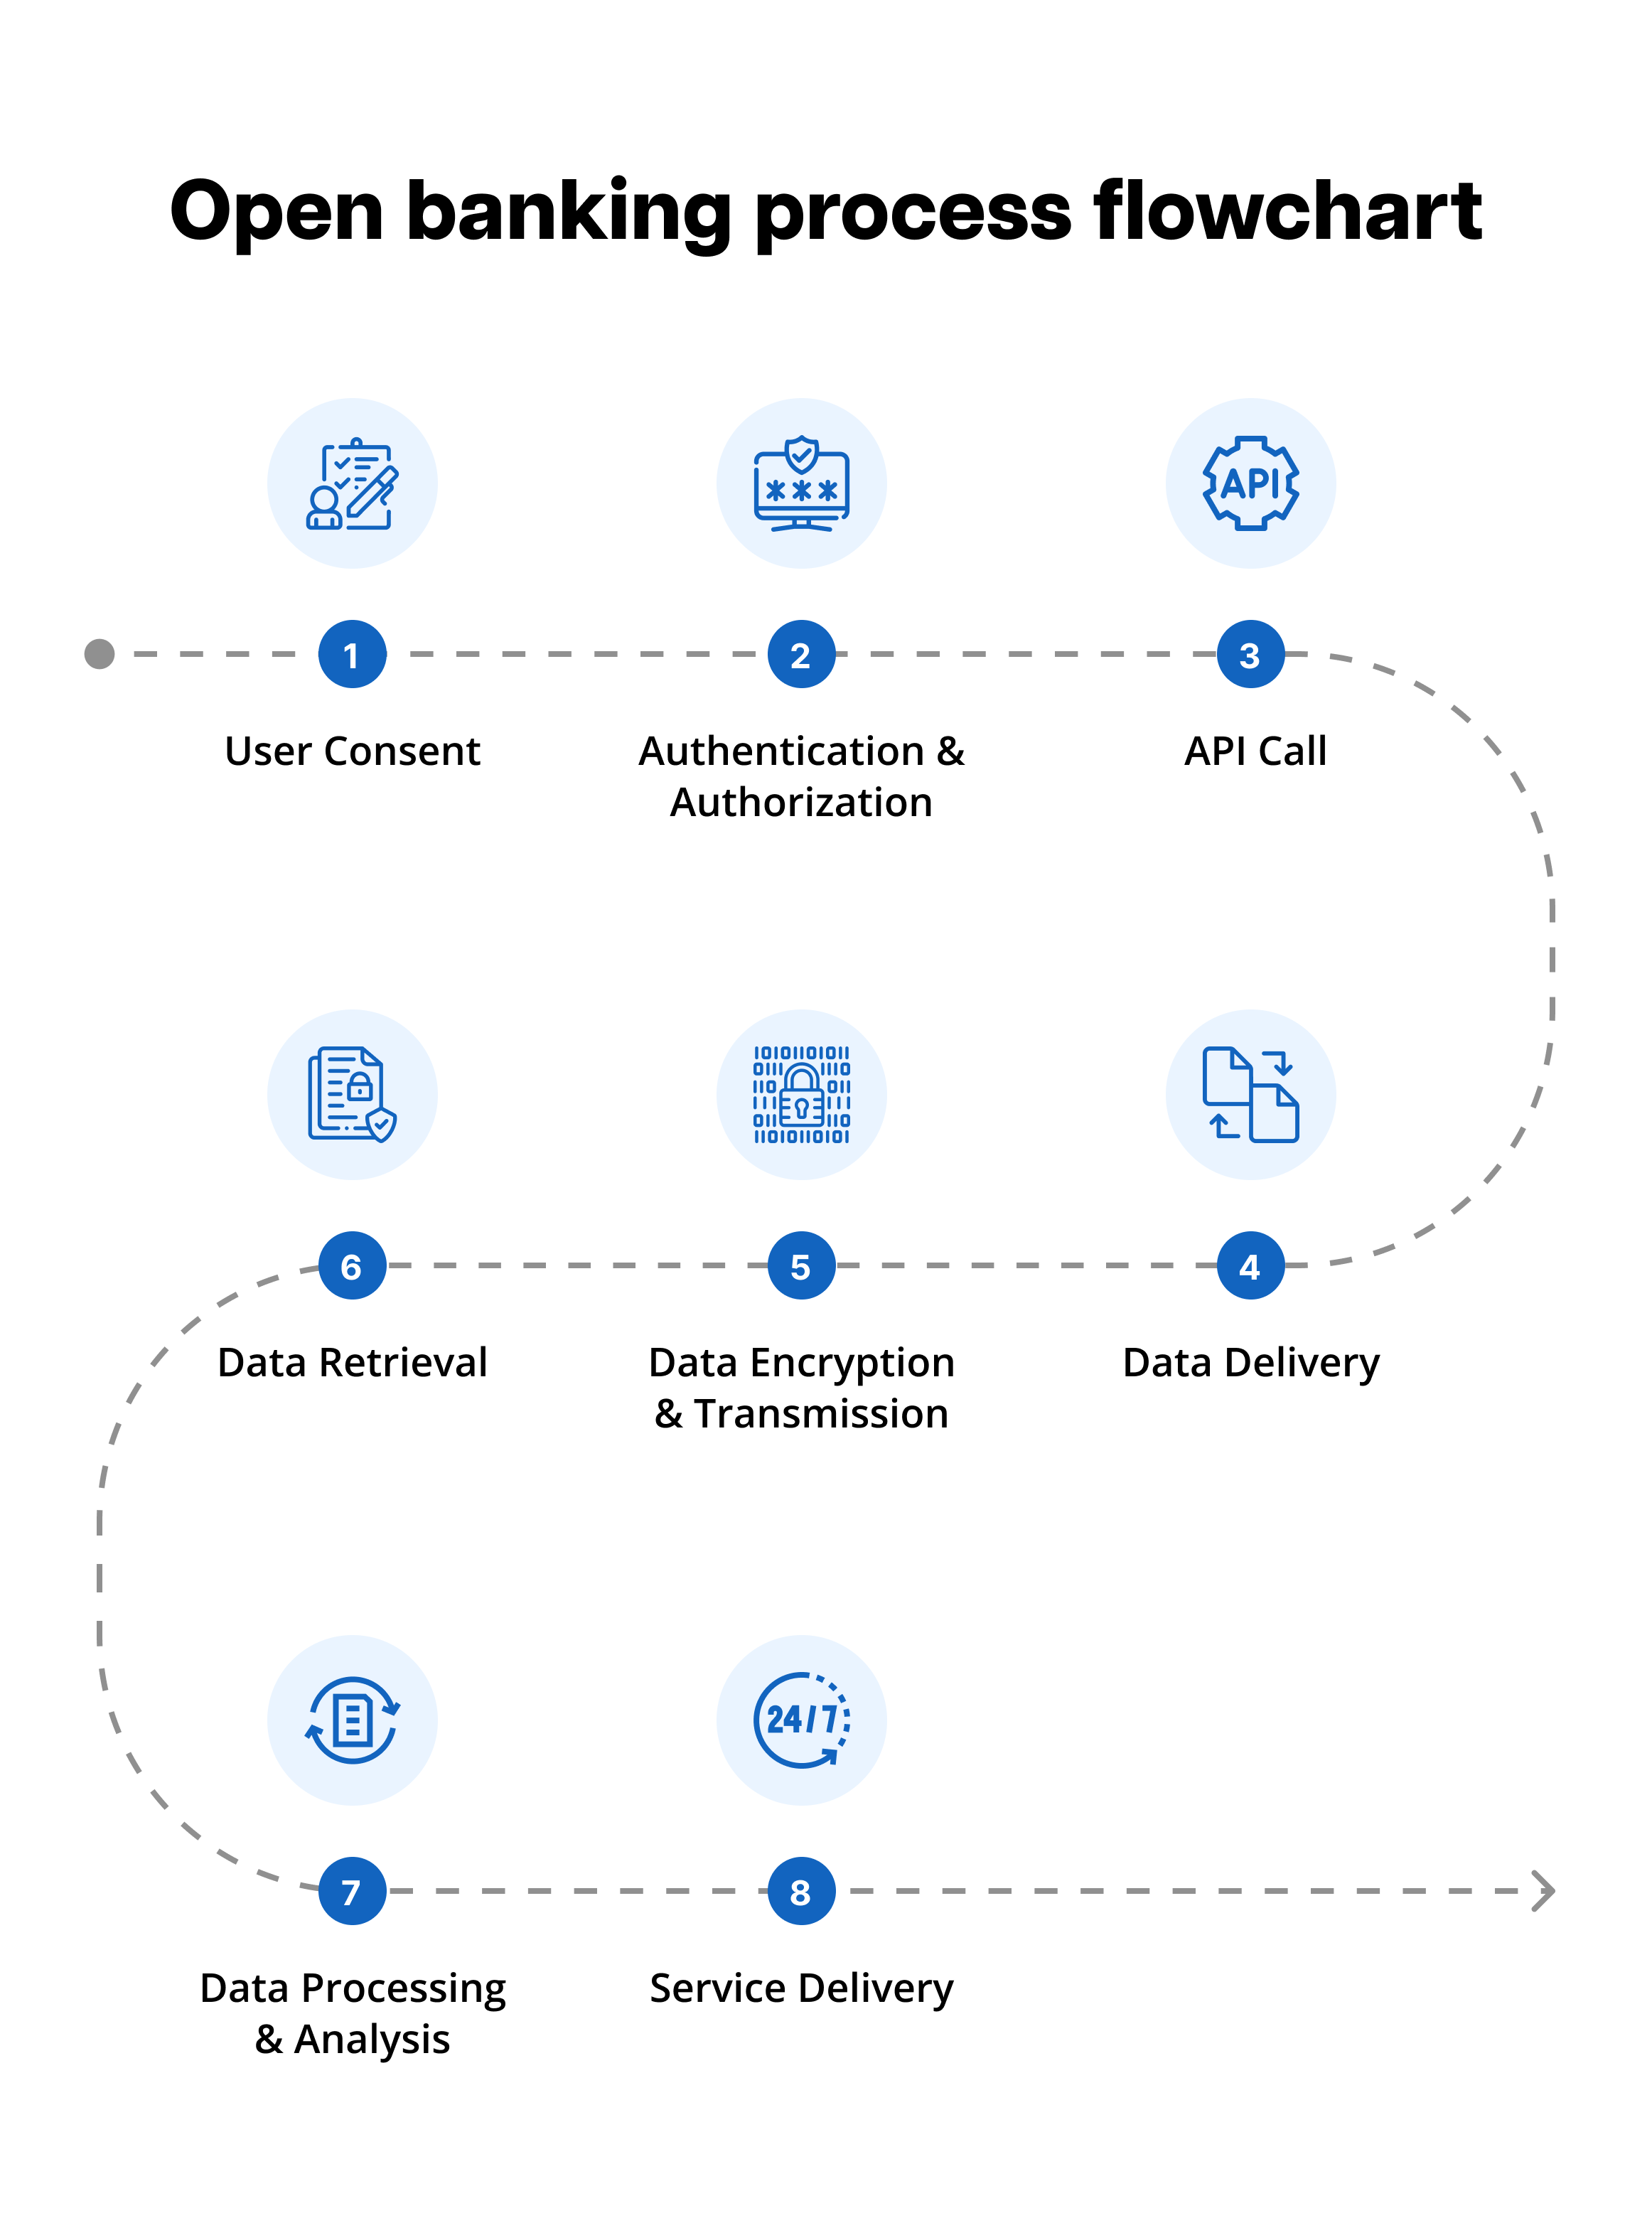 A flowchart showing the steps involved in the open banking process